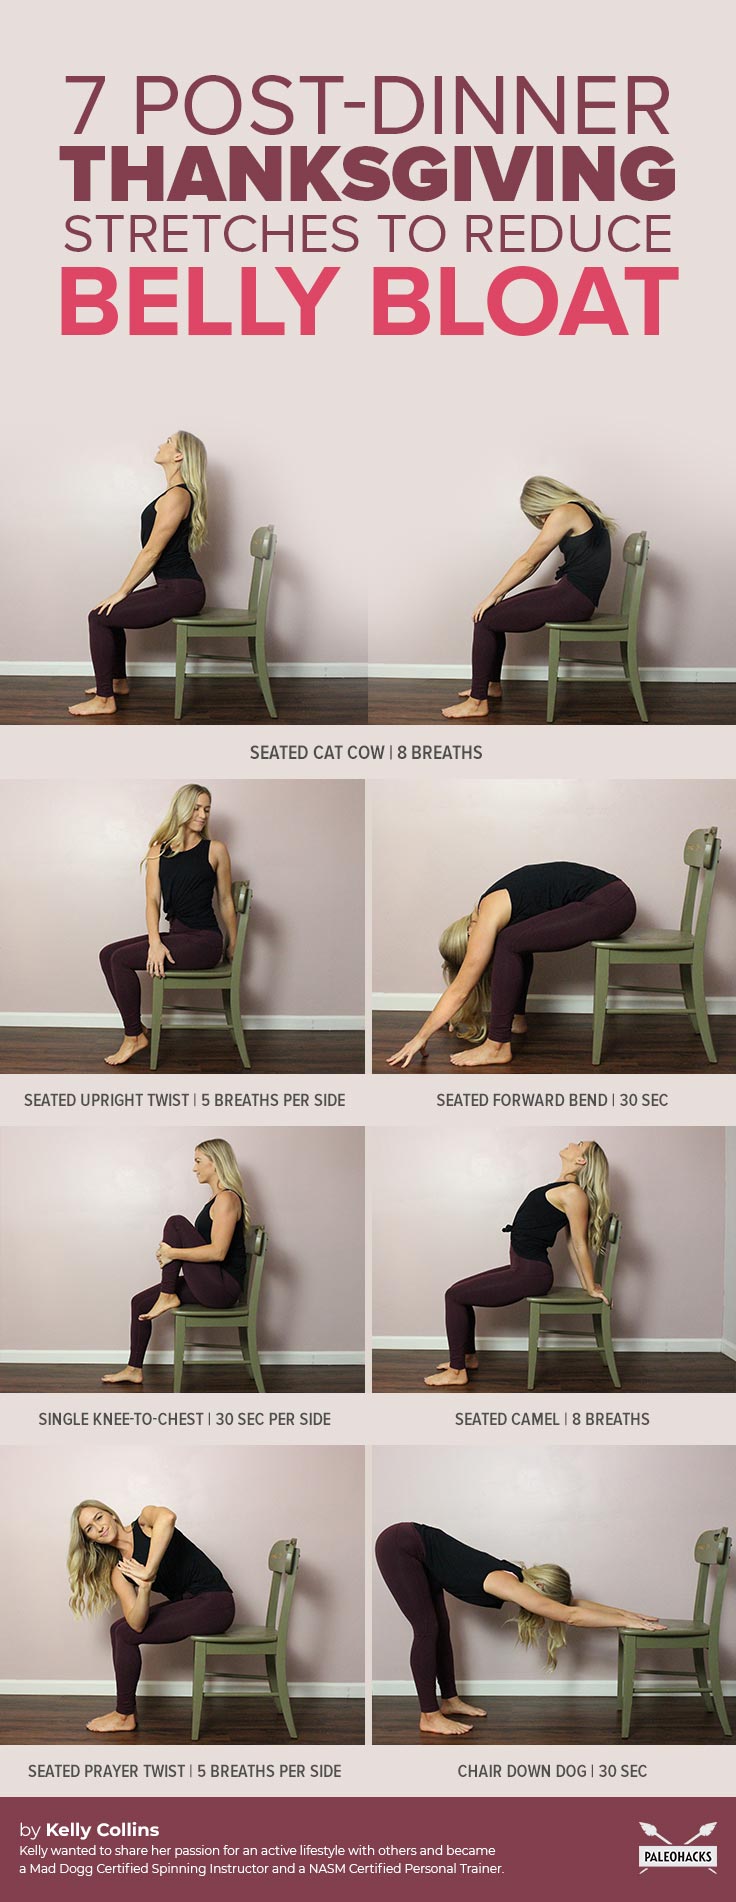 If you feel the need to unbutton your pants after Thanksgiving dinner, try these de-bloating stretches you can do right in your chair instead.